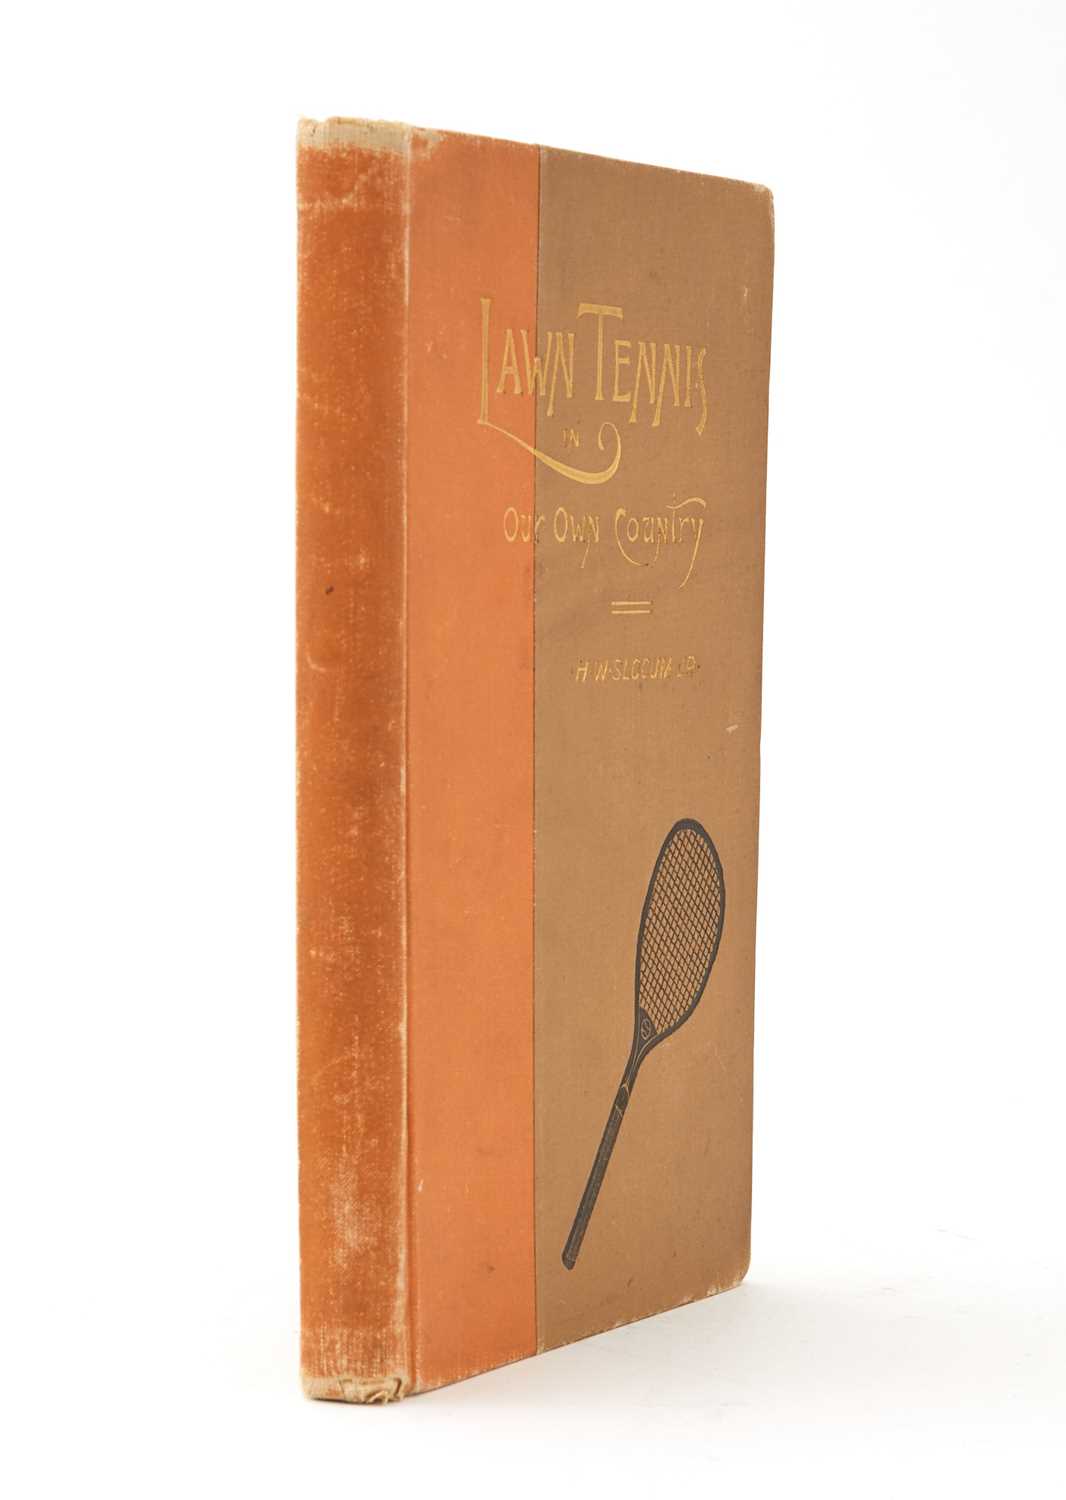 Lot 93 - [TENNIS]
SLOCUM, H.W. Lawn Tennis in our own Country.